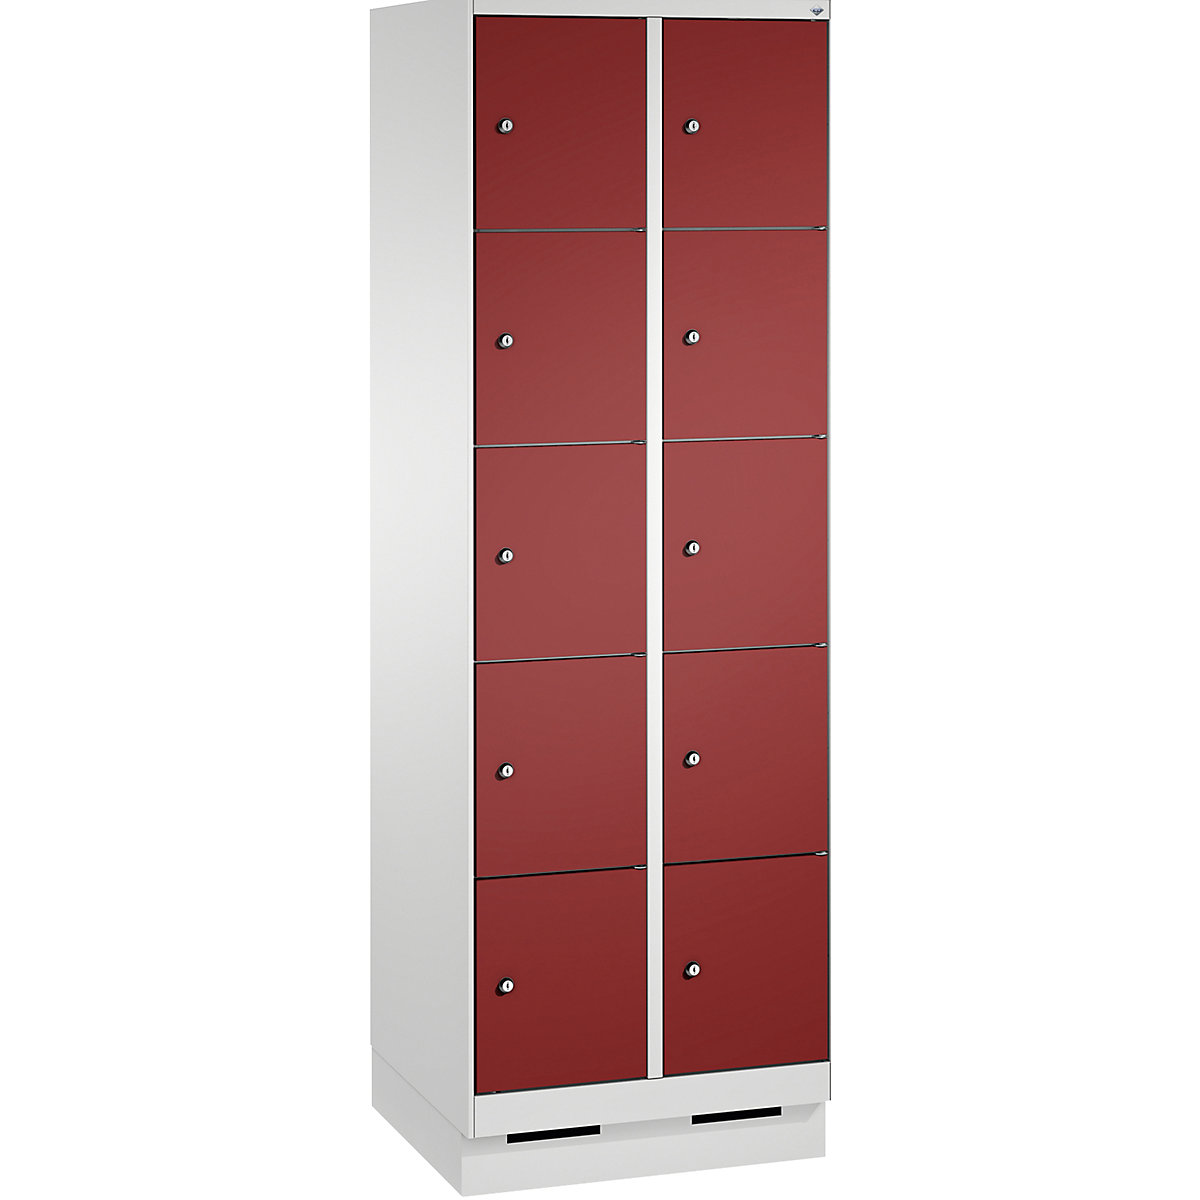 EVOLO locker unit, with plinth – C+P, 2 compartments, 5 shelf compartments each, compartment width 300 mm, light grey / ruby red-8